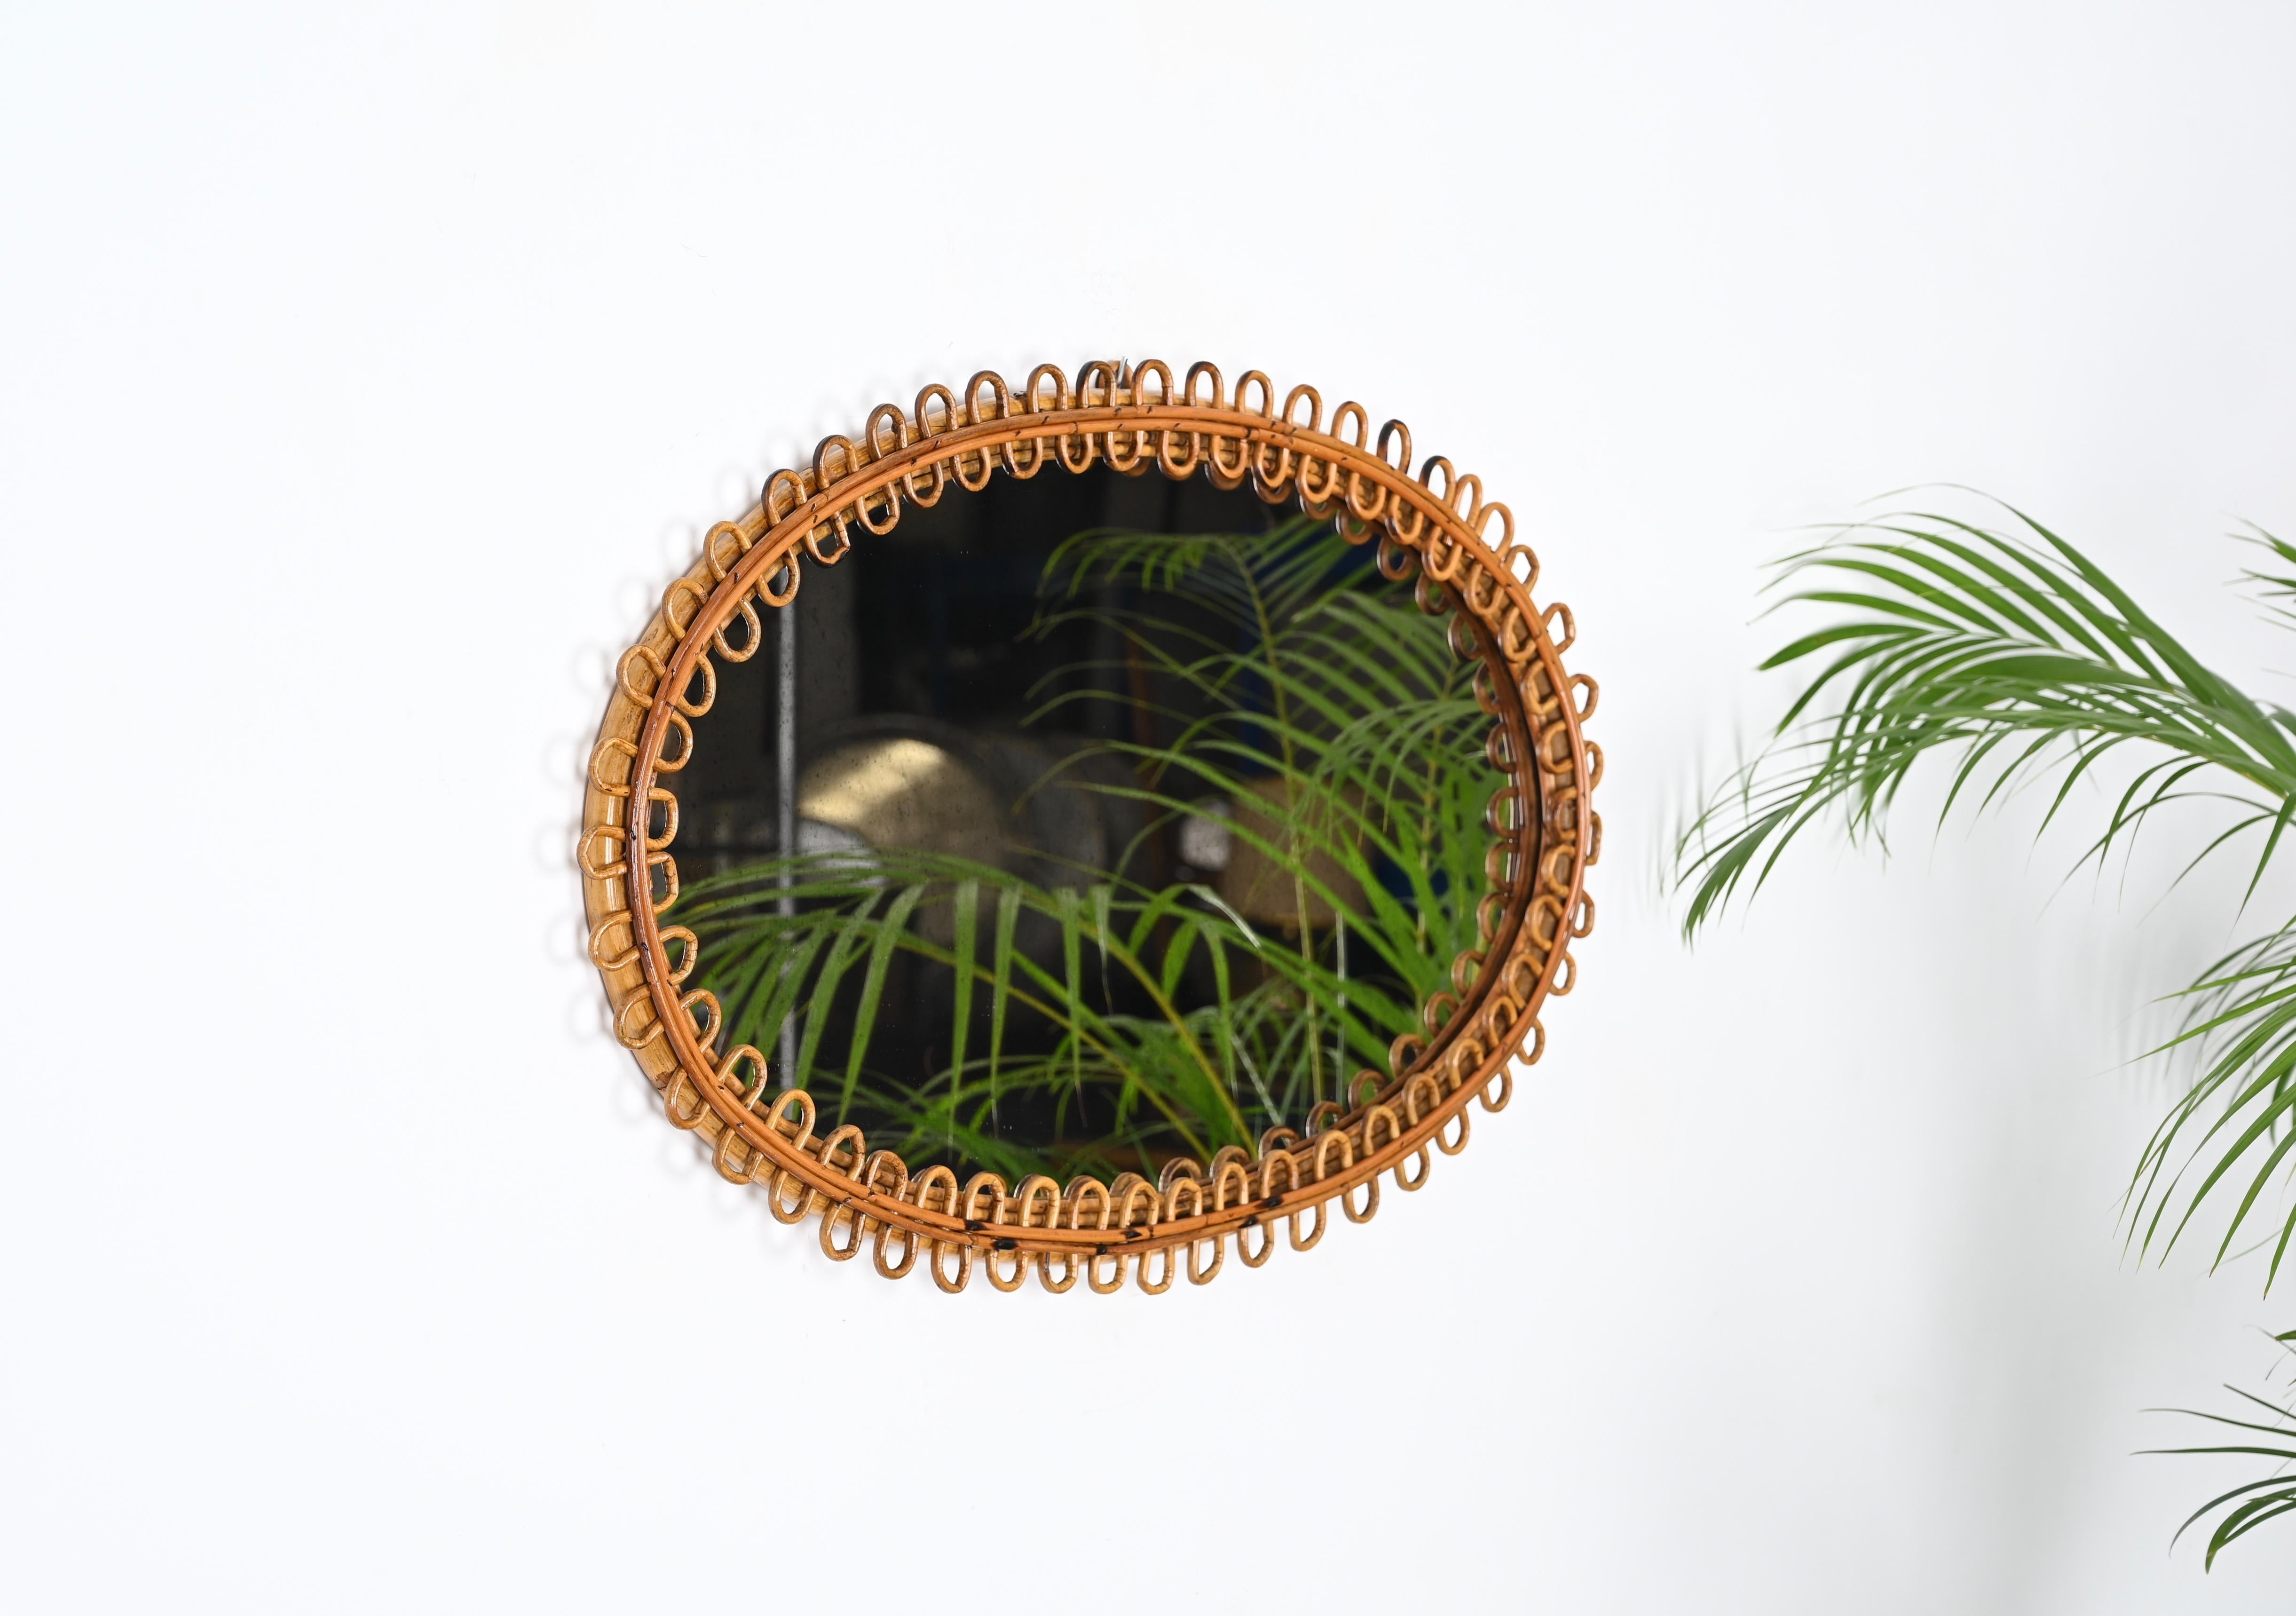 Fantastic large oval mirror with curved rattan beams and bamboo frame. This beautiful French Riviera style mirror was produced in Italy in the 1960s.

The mirror features a gorgeous oval double frame in curved bamboo enriched all around by curved